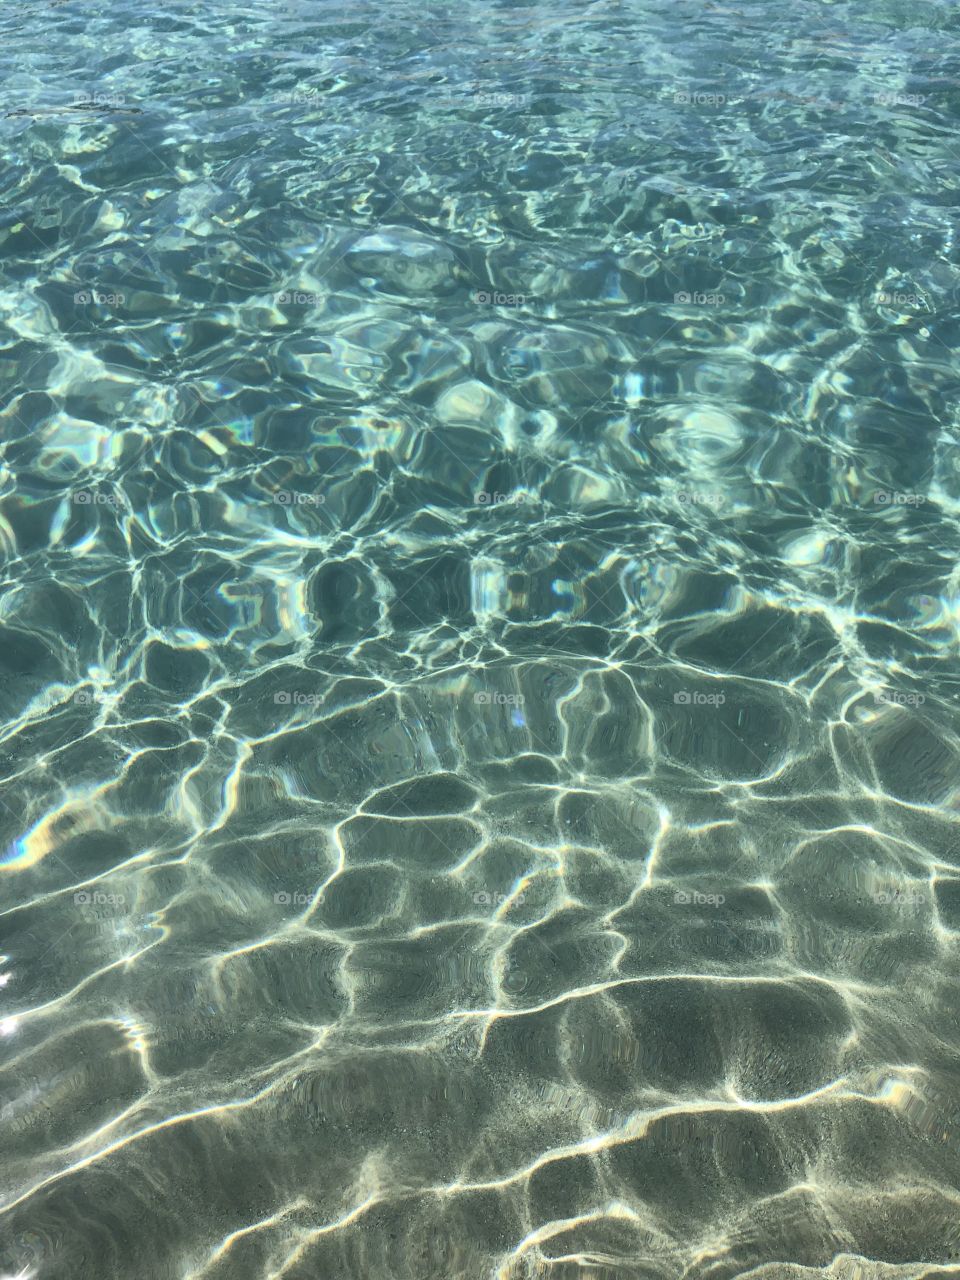 The water at singer island 